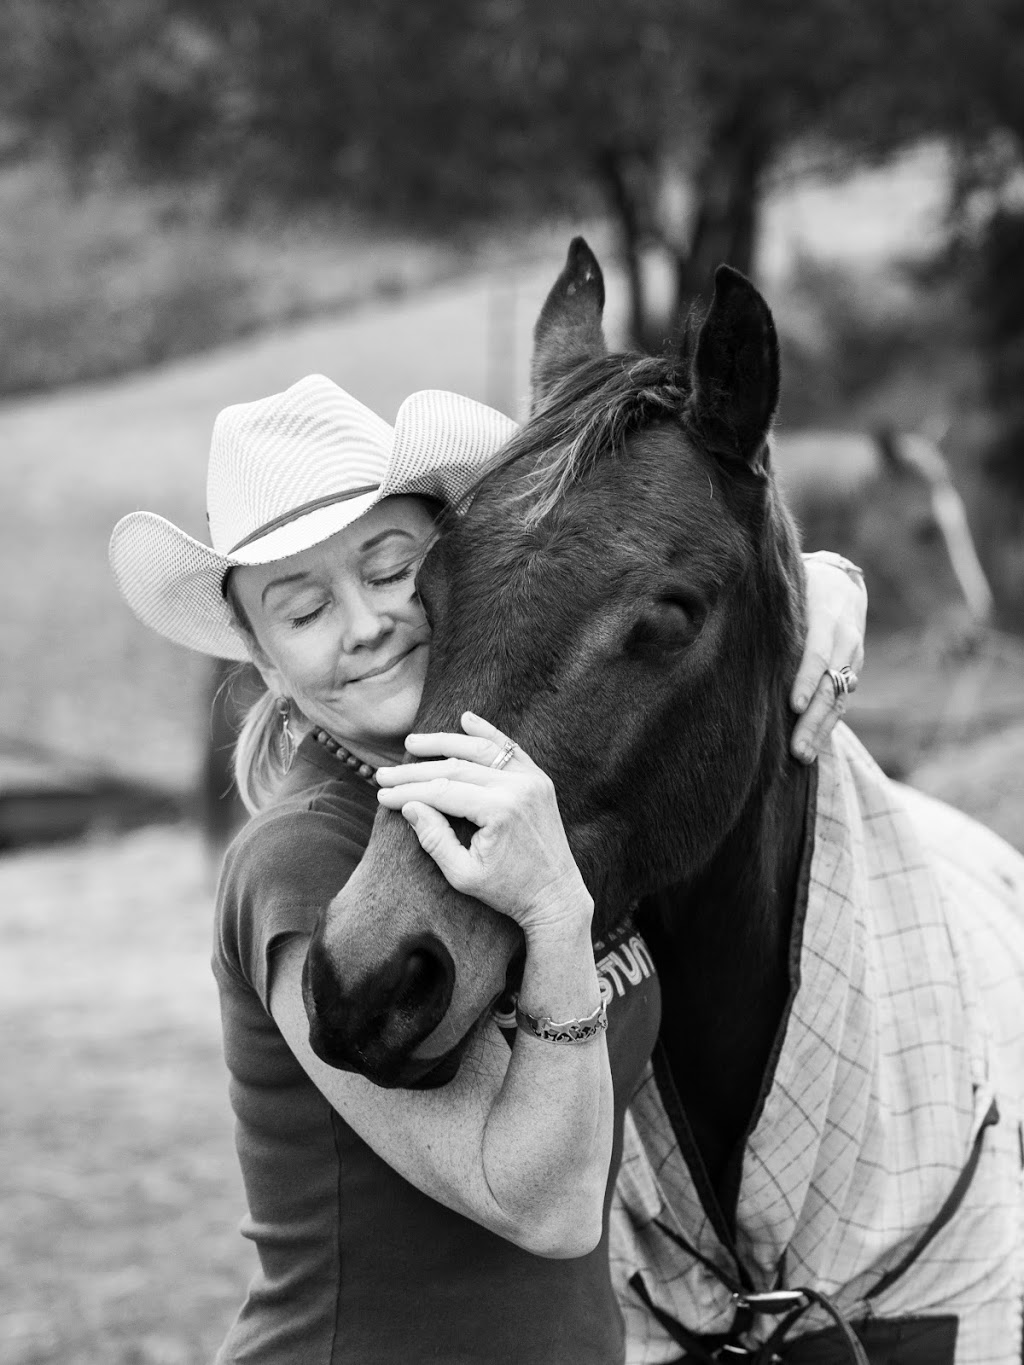 Gale Falcongreen Horsemanship & Equine Assisted Therapy | health | 926 Bunya Rd, Draper QLD 4520, Australia | 0411264060 OR +61 411 264 060